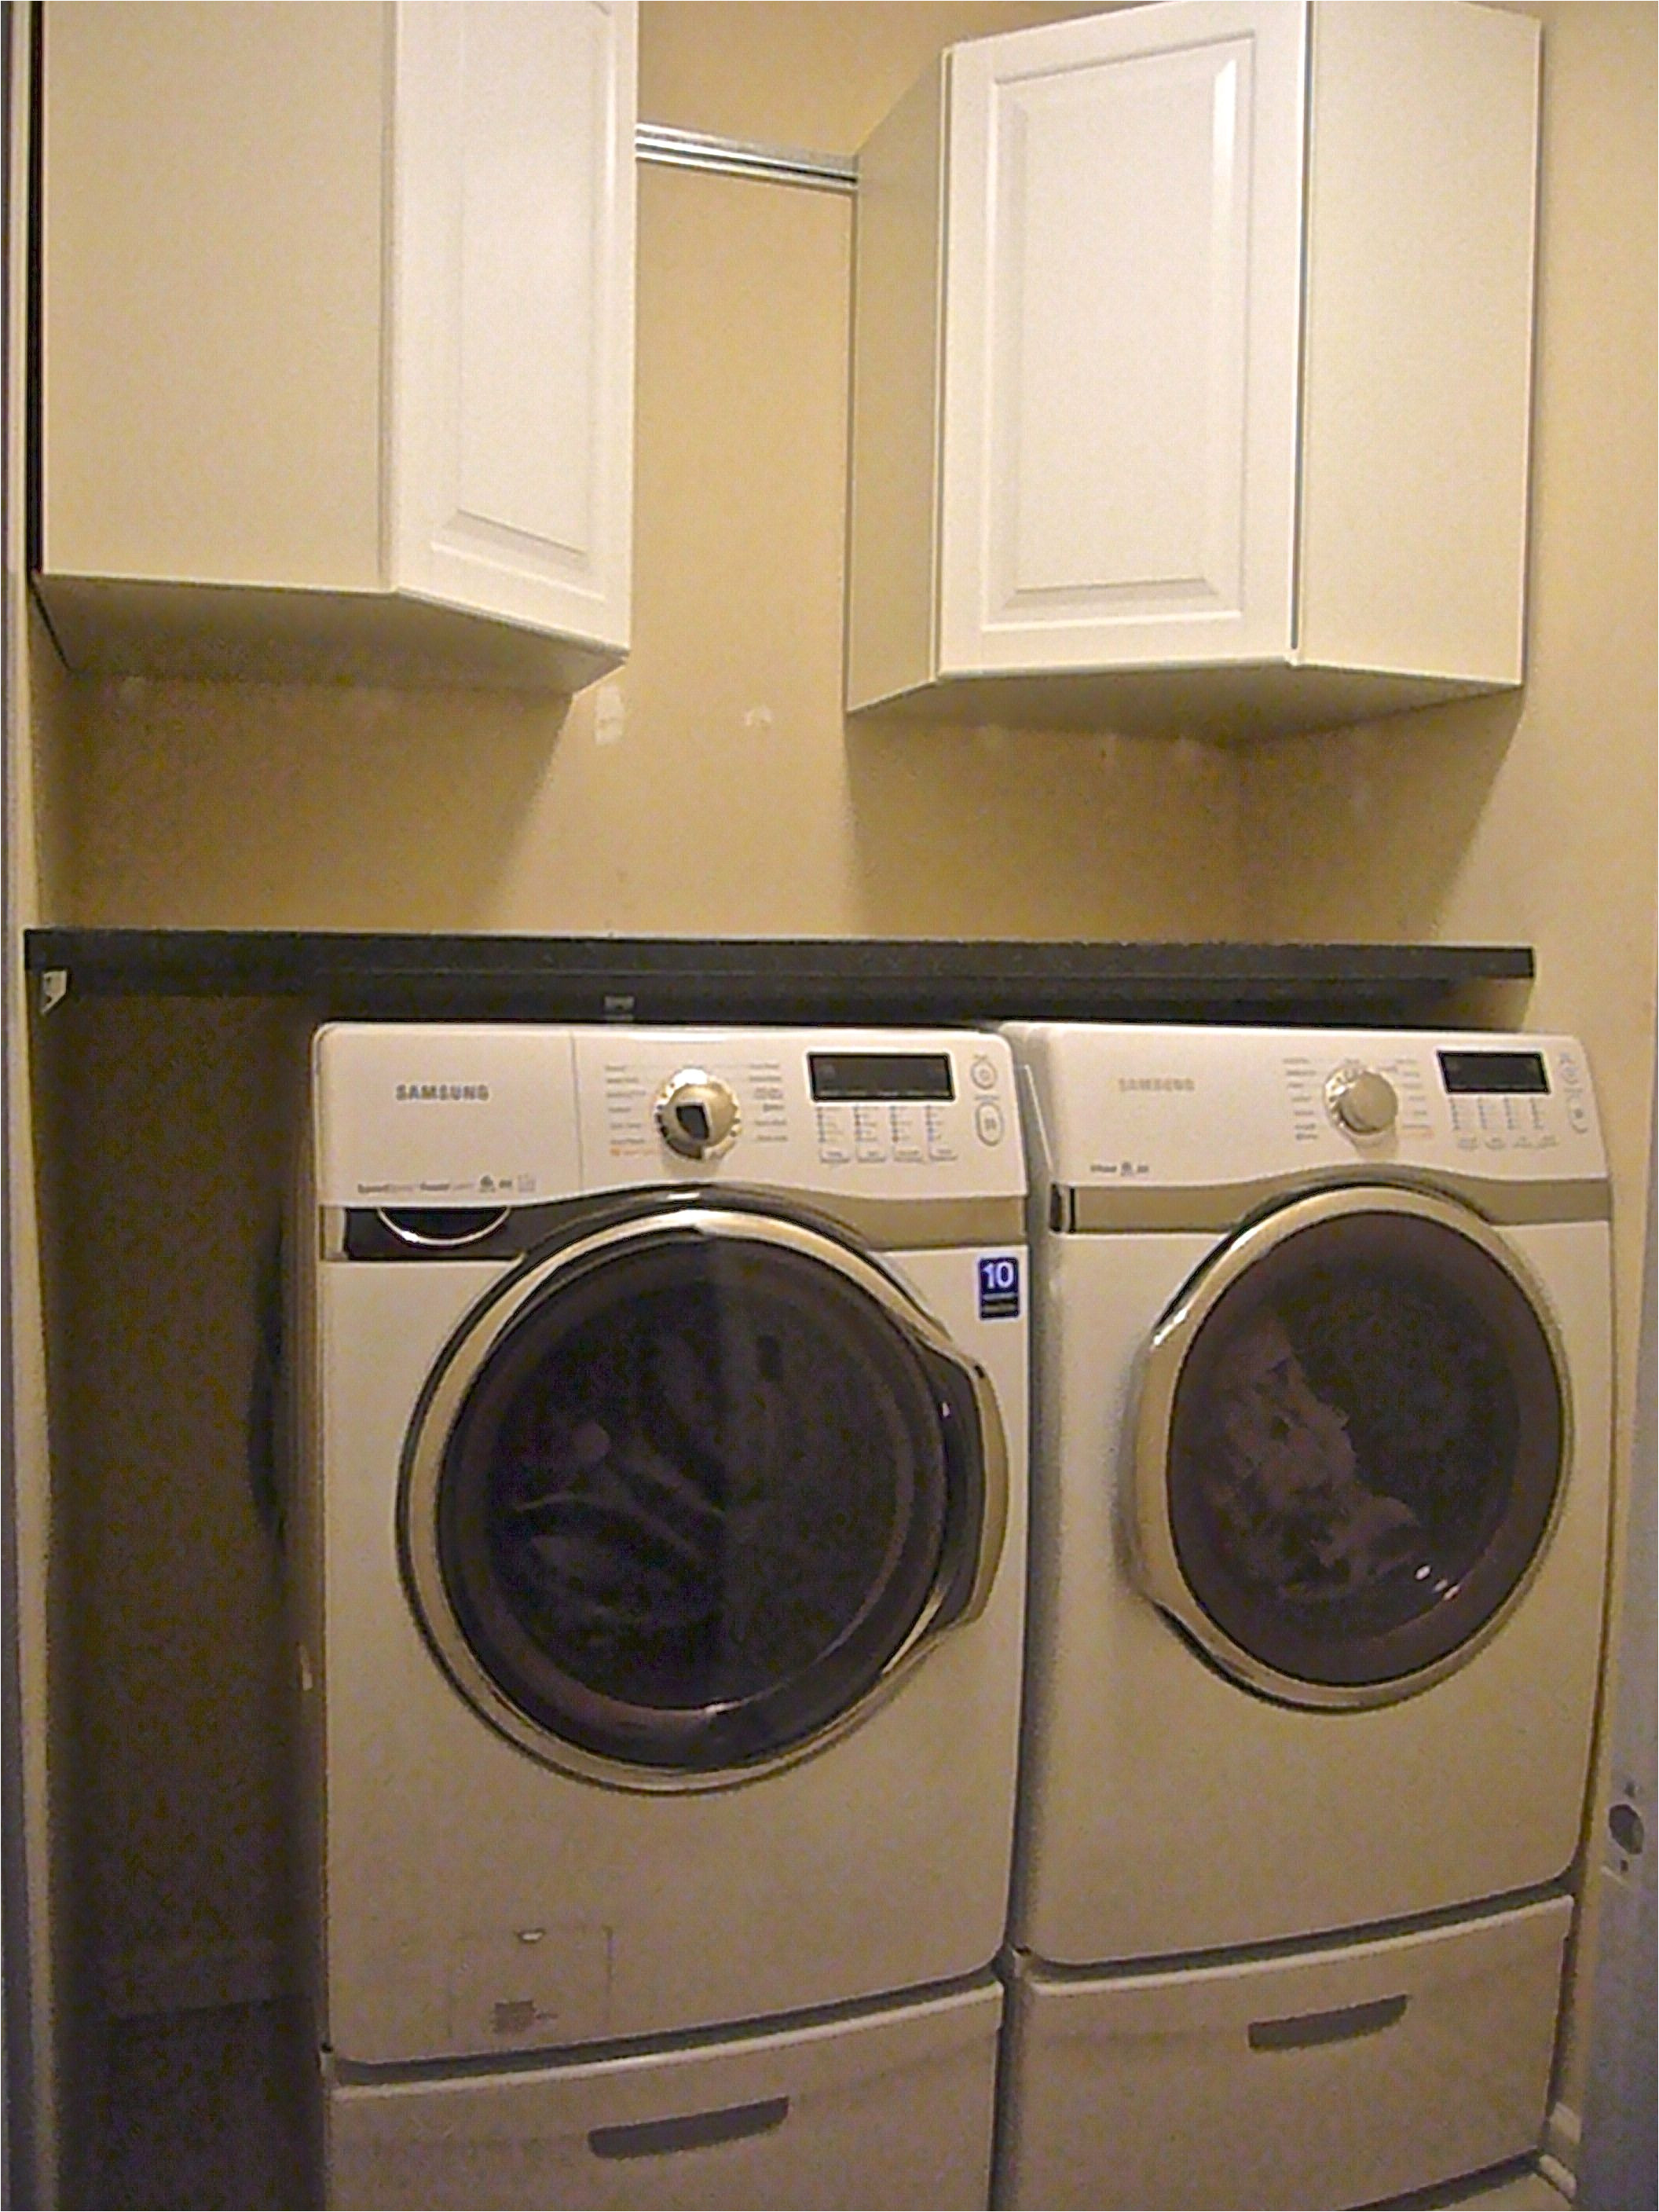 Washer Dryer Pedestal Ikea I Didn T Want to Lose My Pedestal Storage and I Like My Machines Up